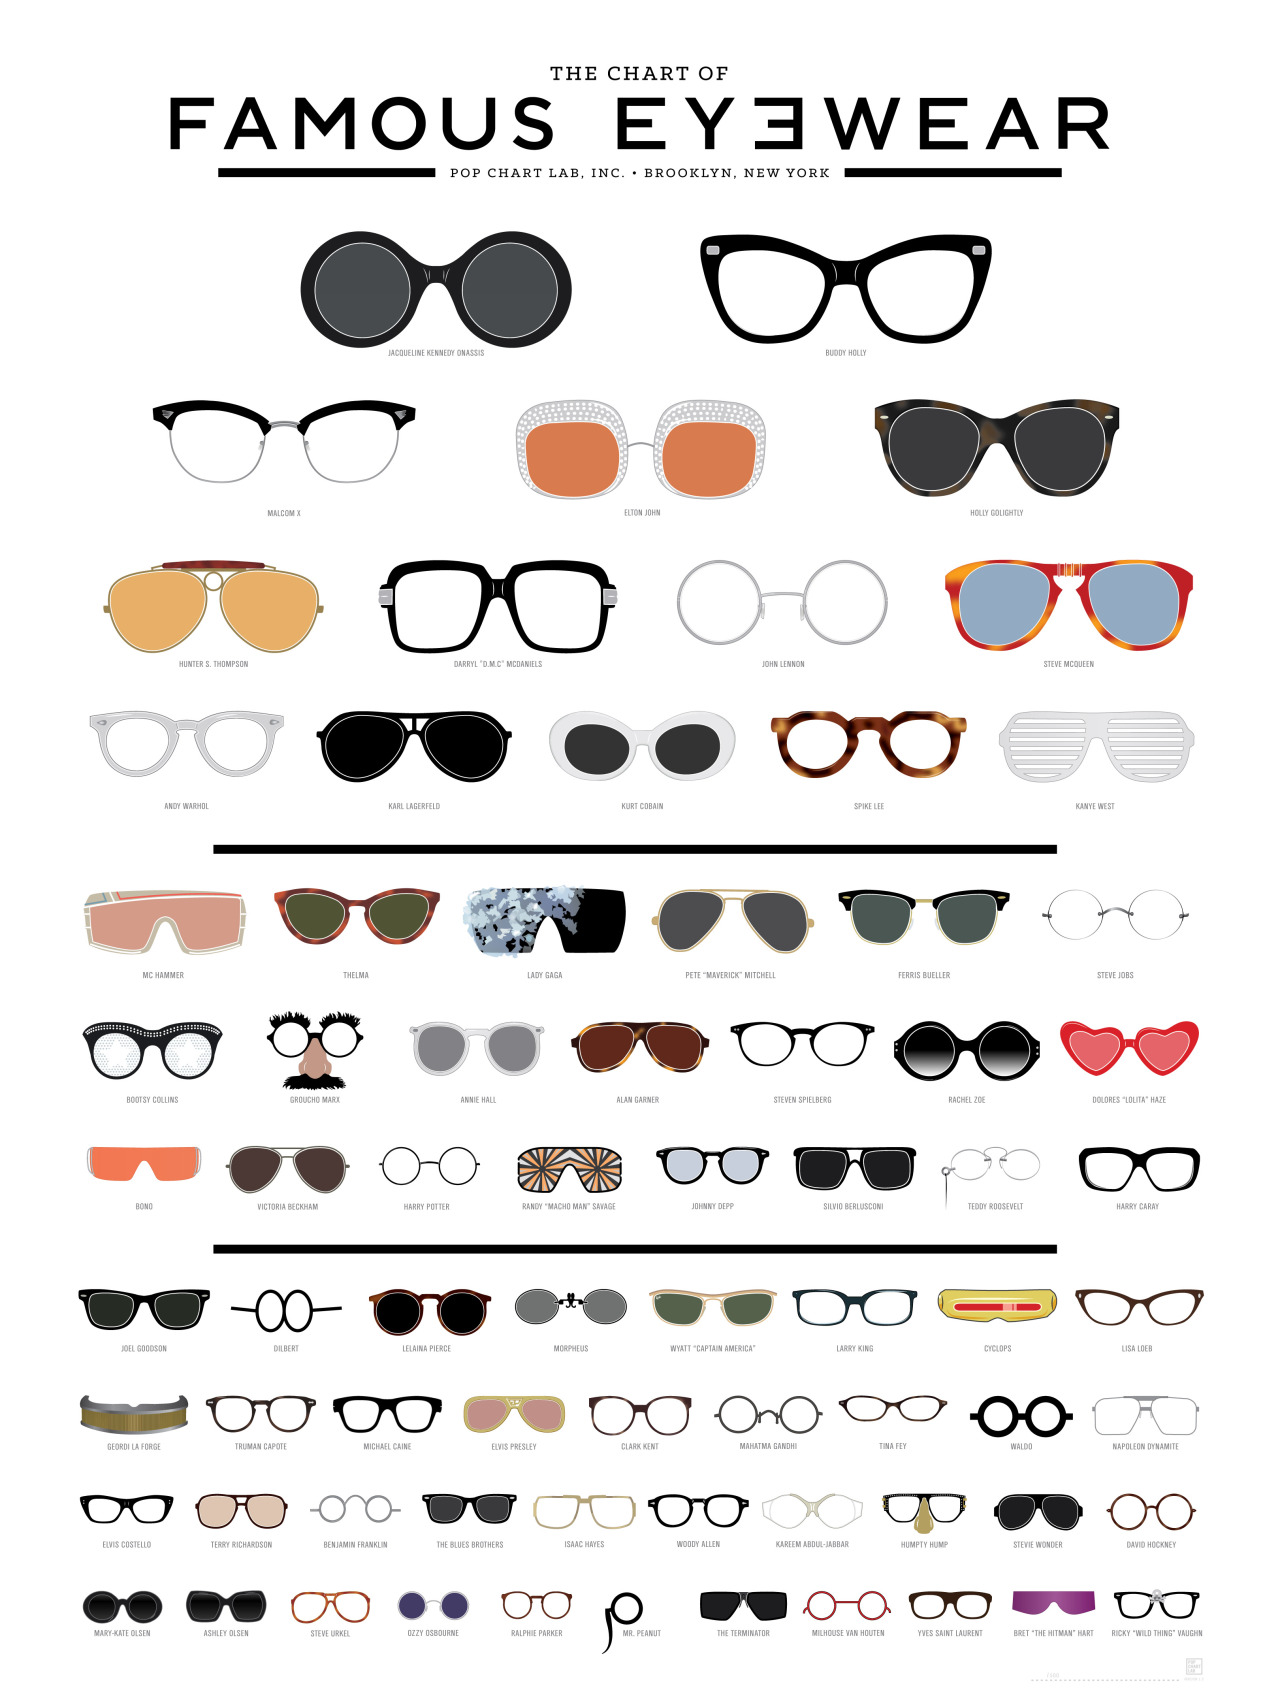 popchartlab:
“A meticulously illustrated eye chart of famous eyewear featuring 73 iconic frames from history, film, music, fashion and culture.
Get The Chart of Famous Eyewear now!
”